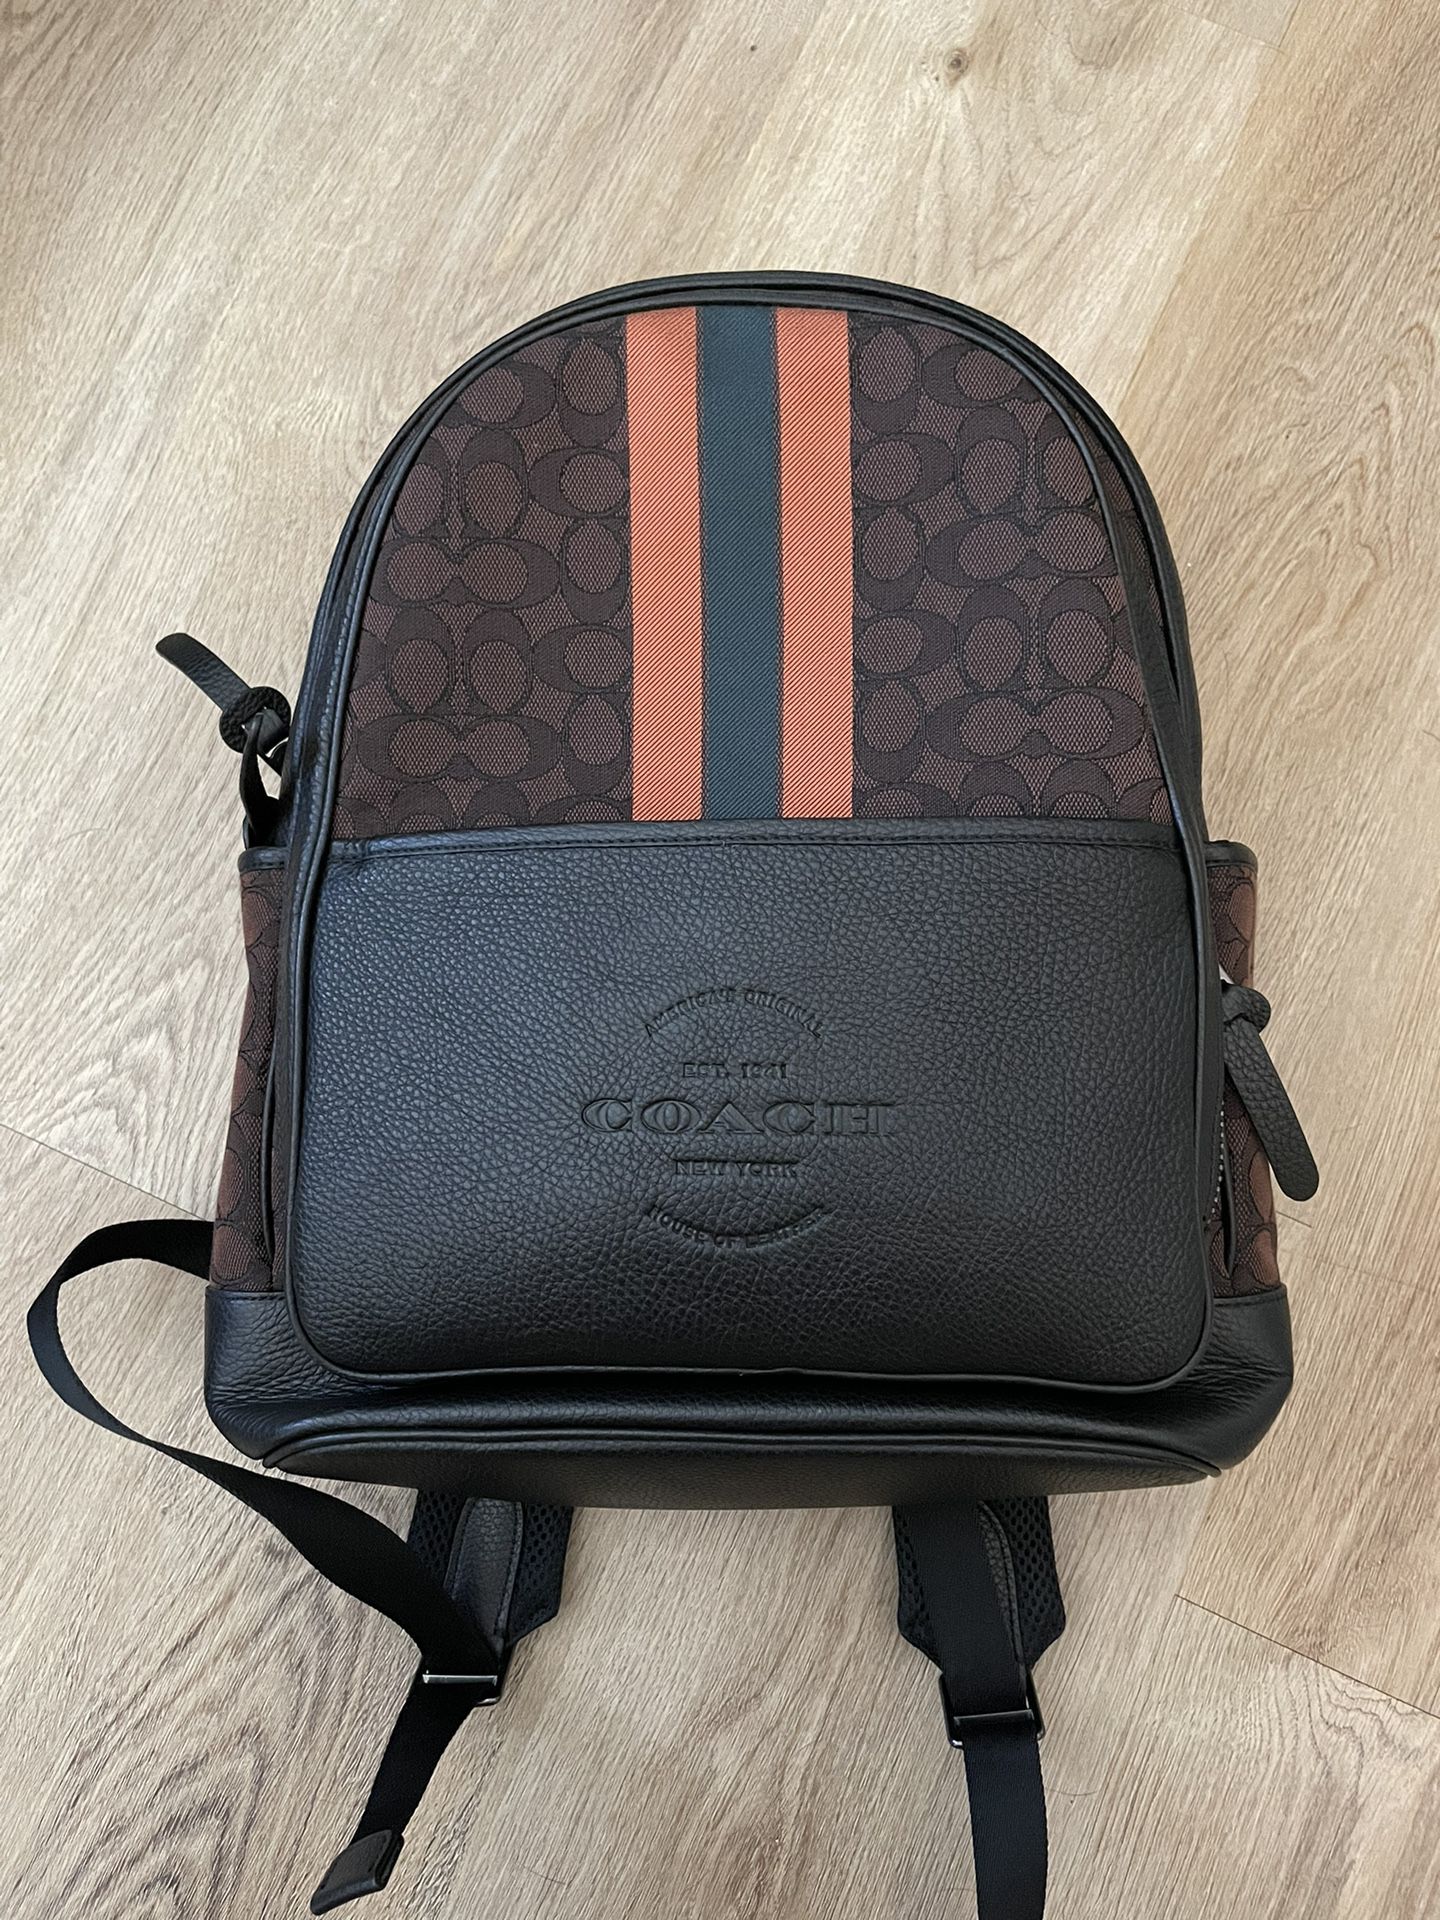 Coach Leather Backpack for Sale in Goodyear, AZ - OfferUp